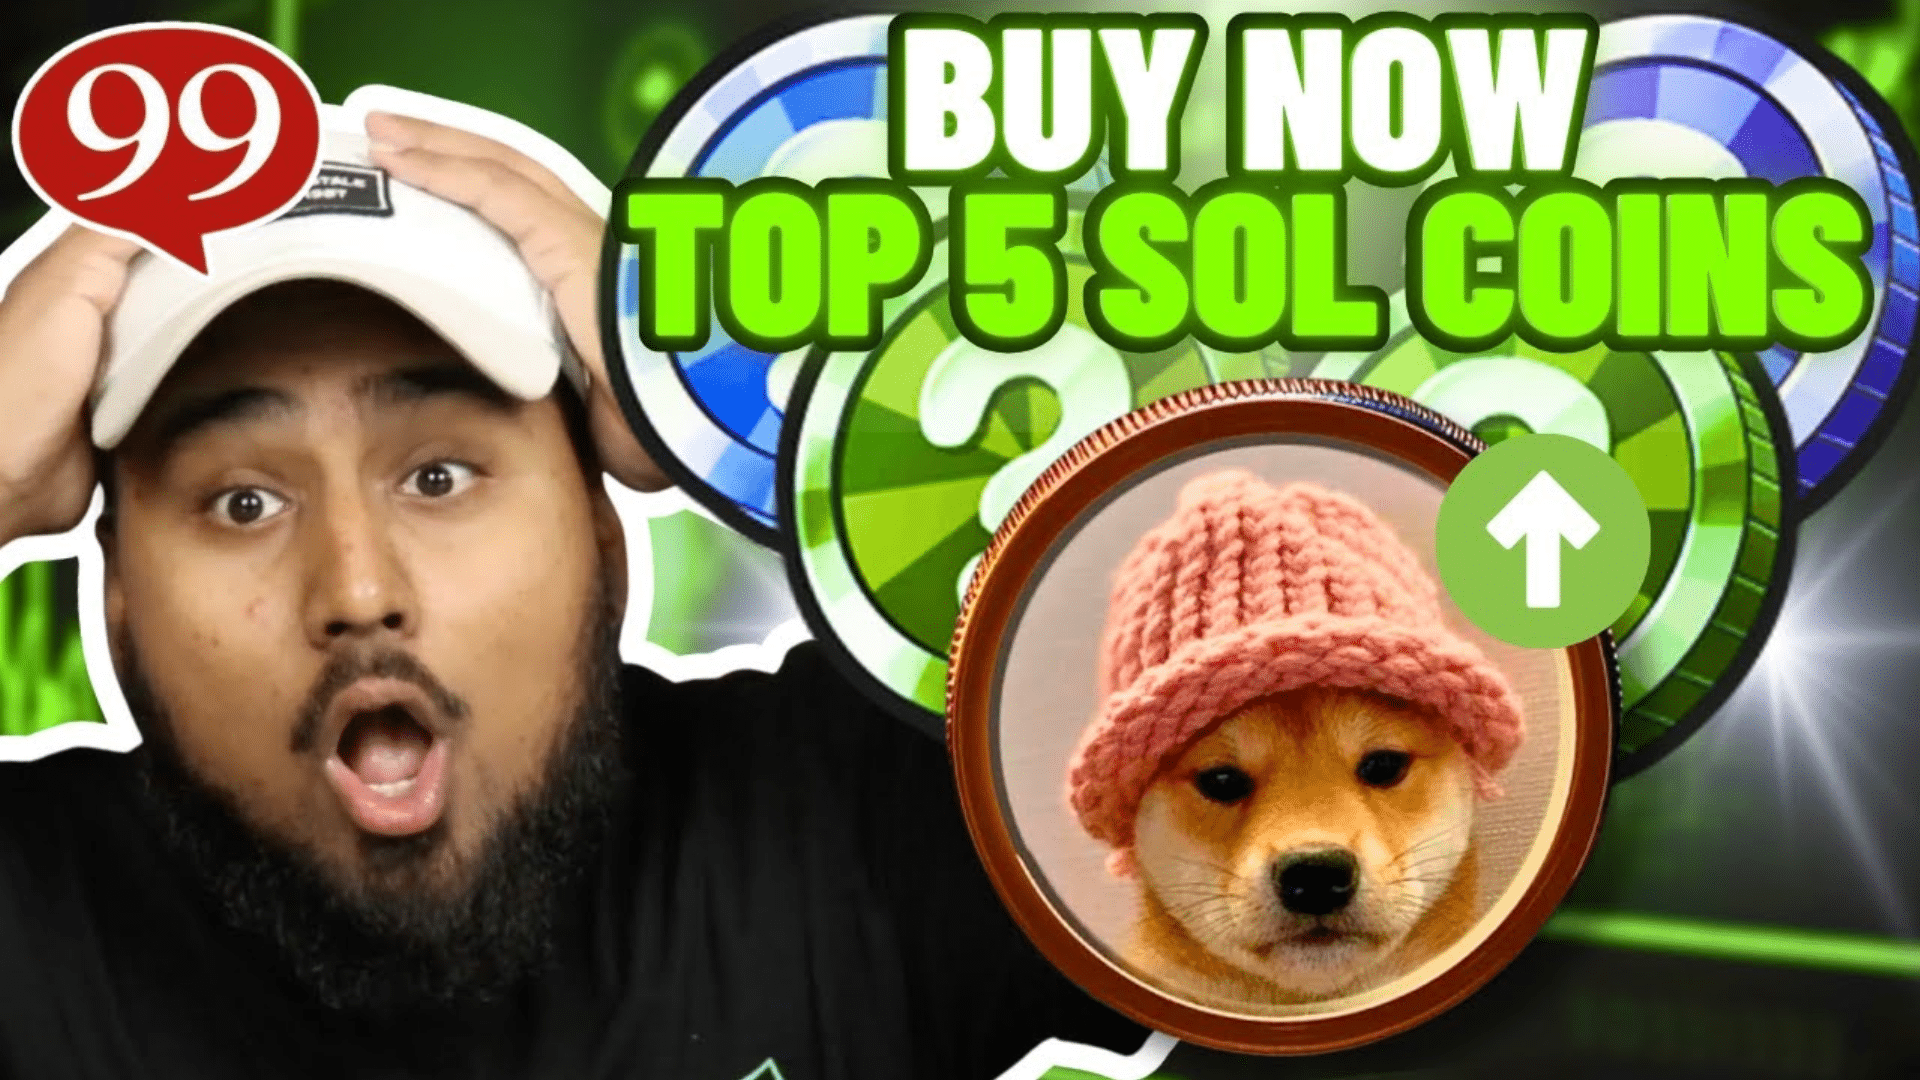 Top 5 Solana Meme Coins Set to Surge – $BONK, $BOME, $SLERF, $WIF, And $SLOTH